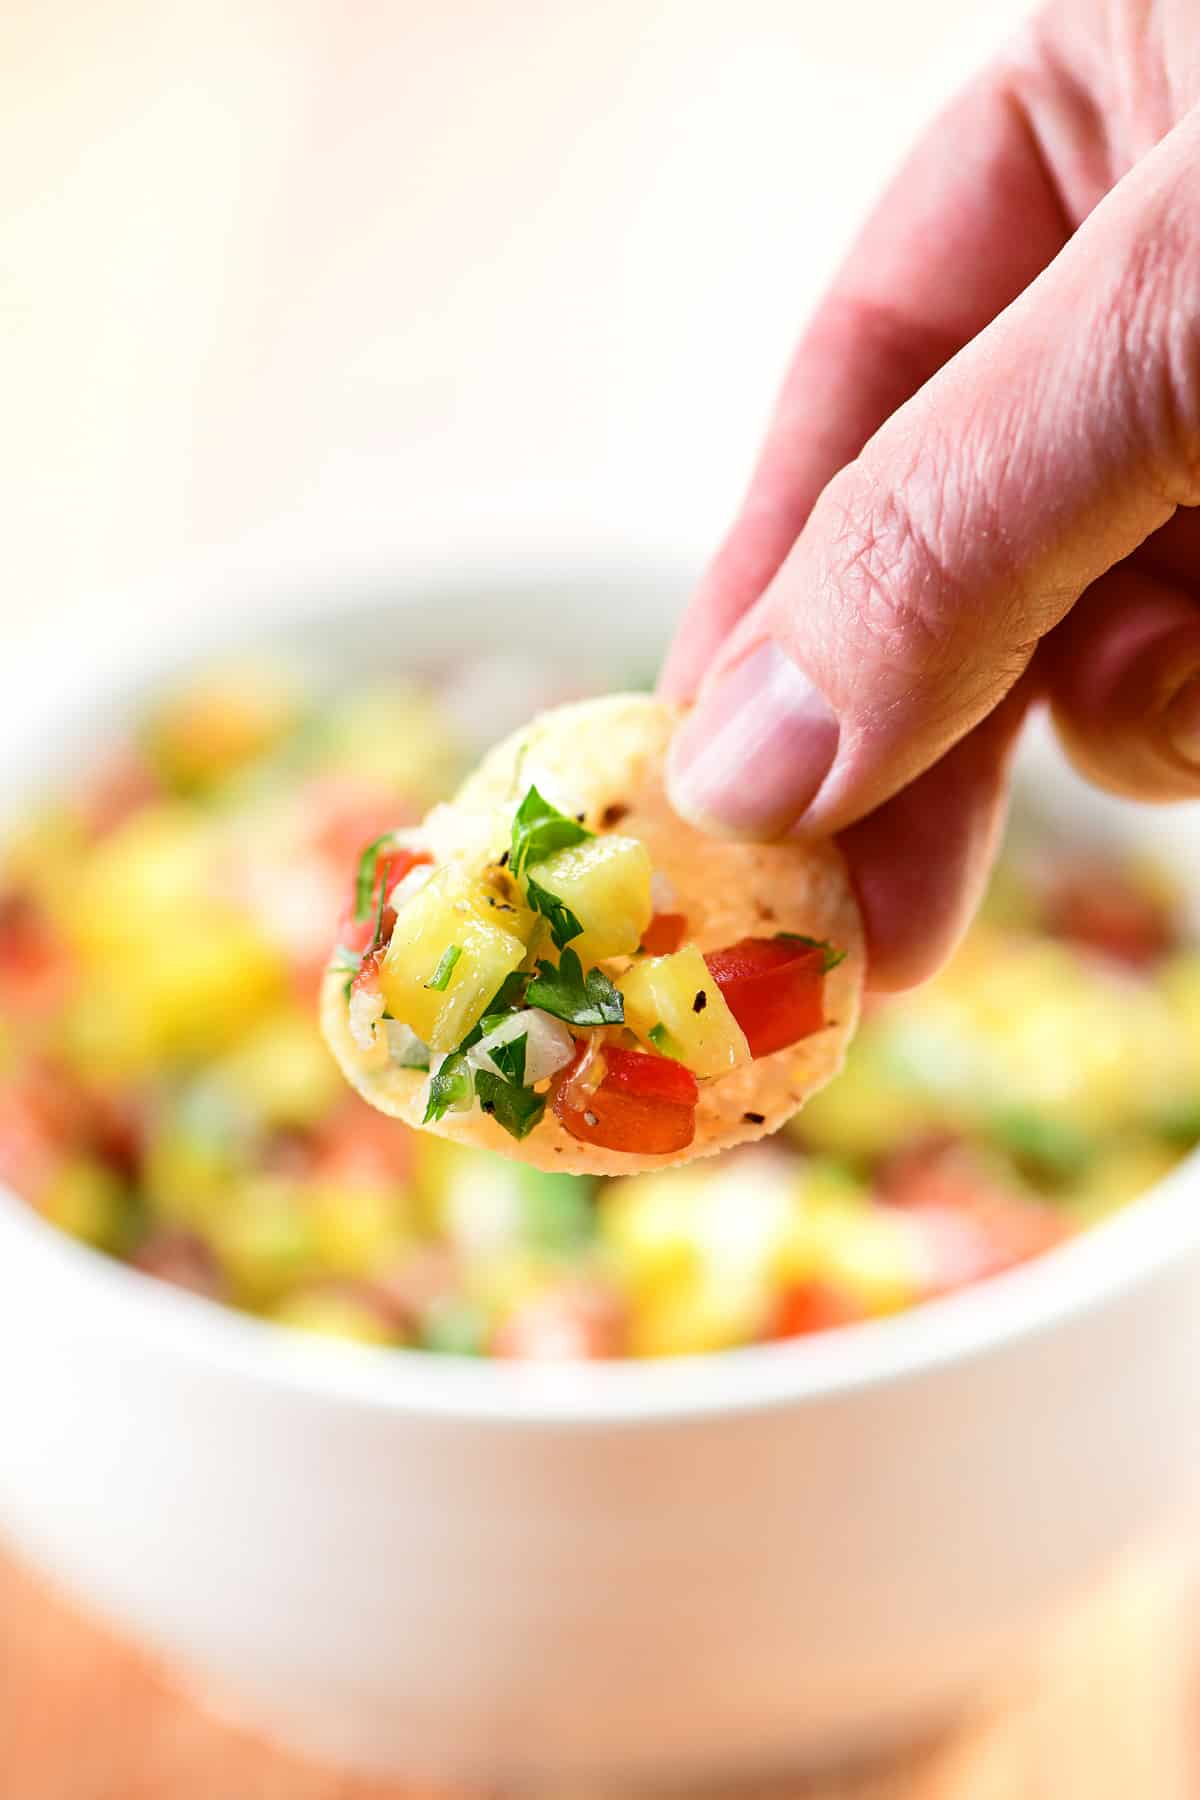 A chip with pineapple pico de gallo on top.